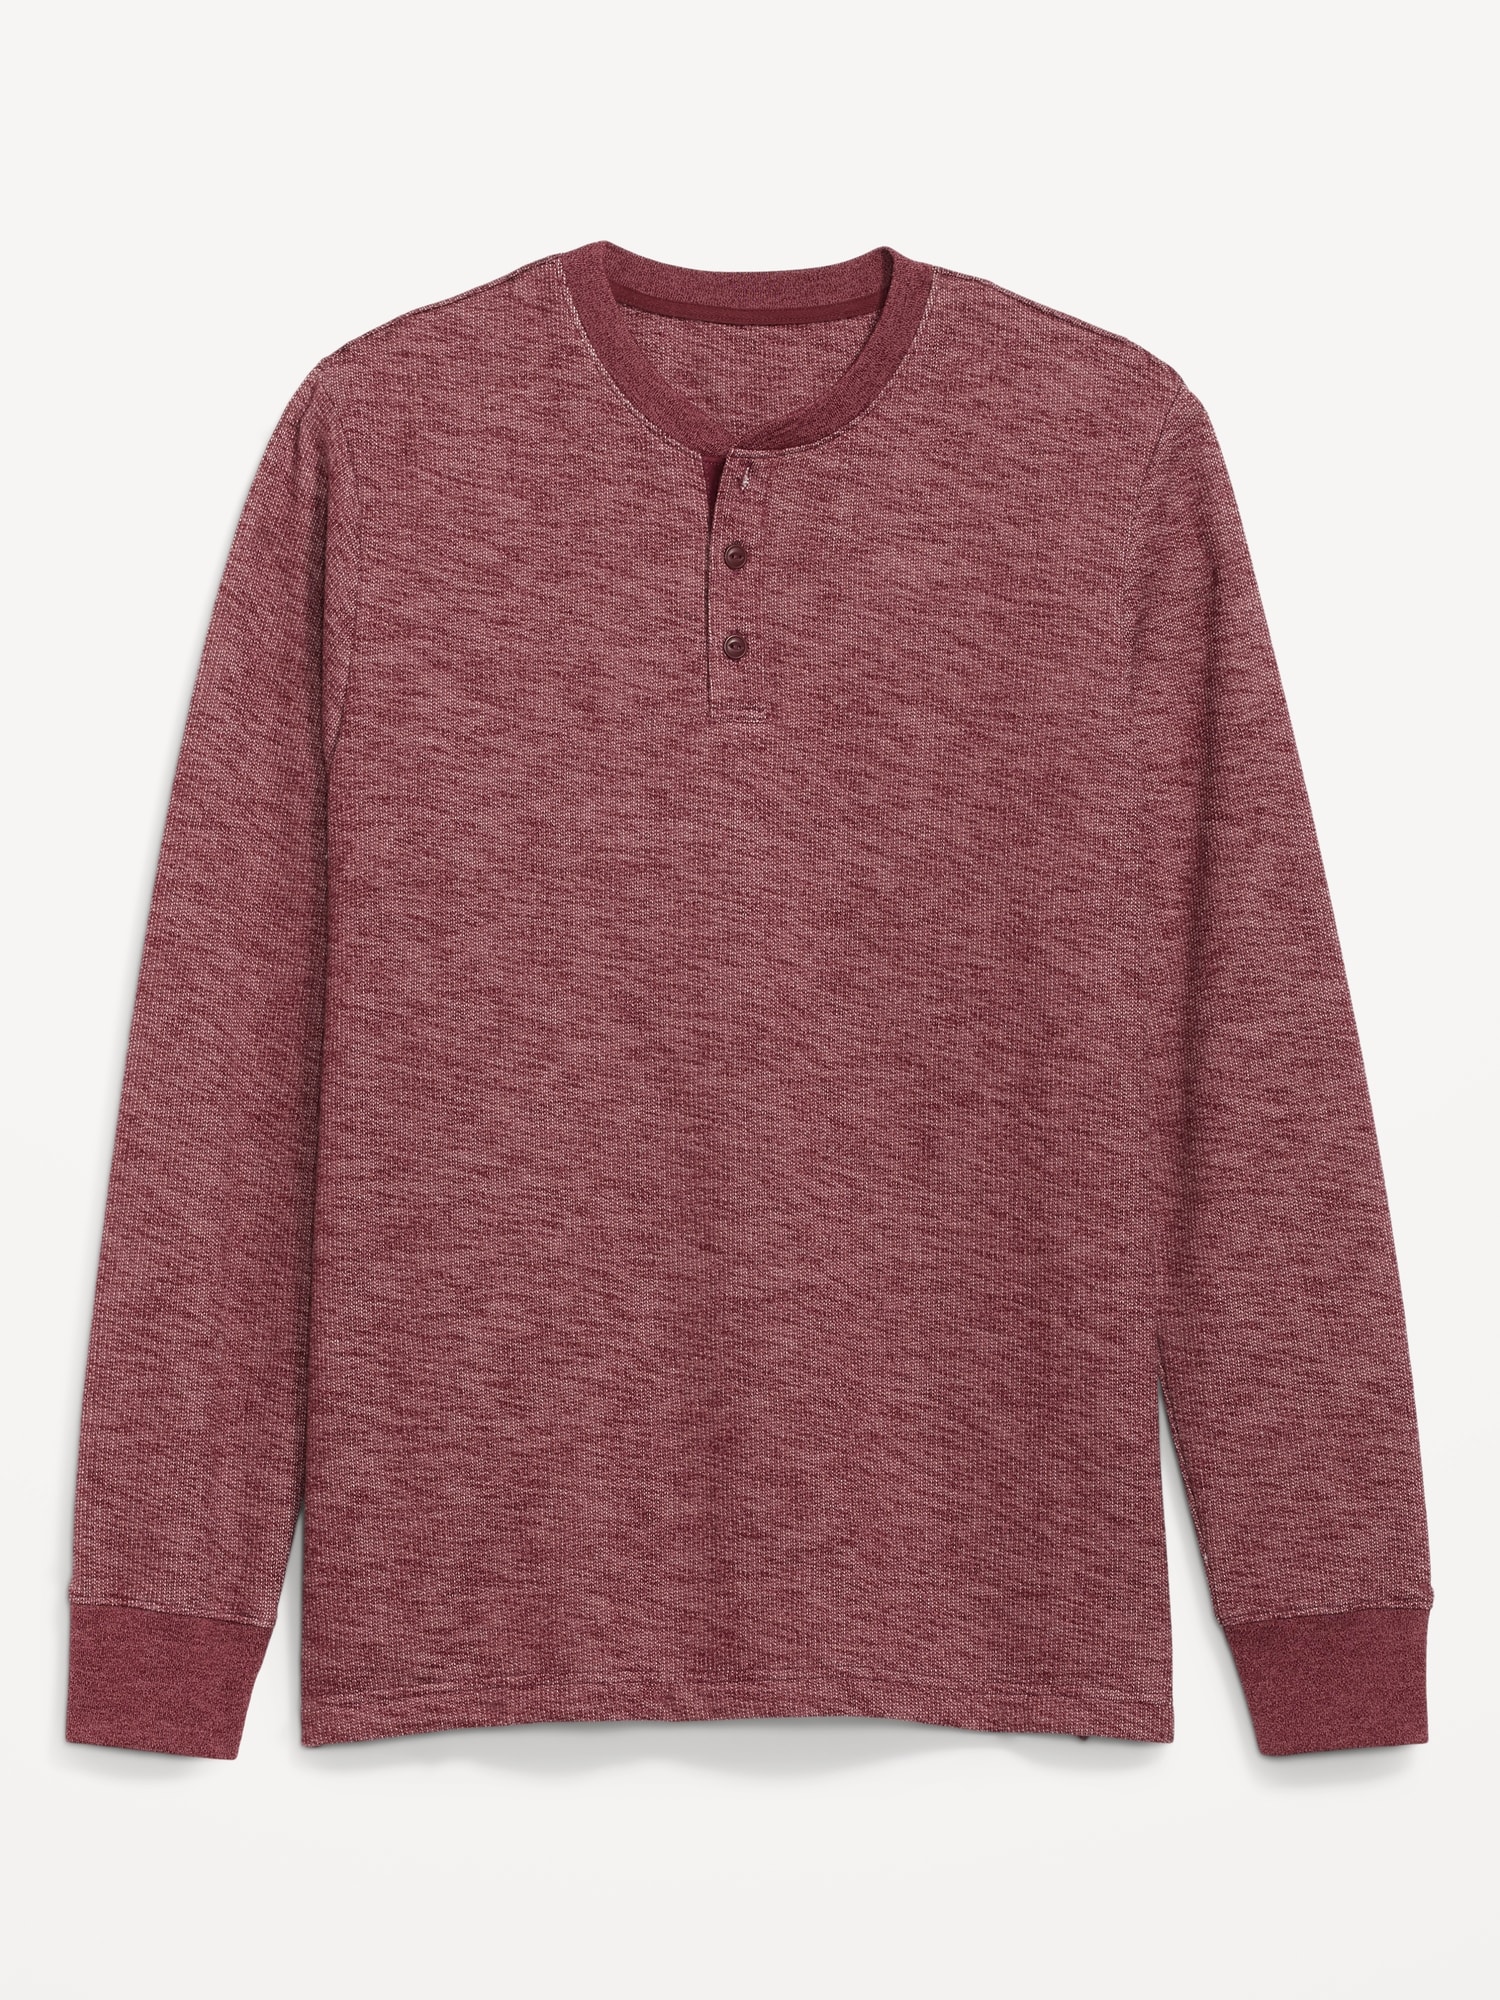 Explore Cozy Style with Long Sleeve Henleys: Your Simple Guide